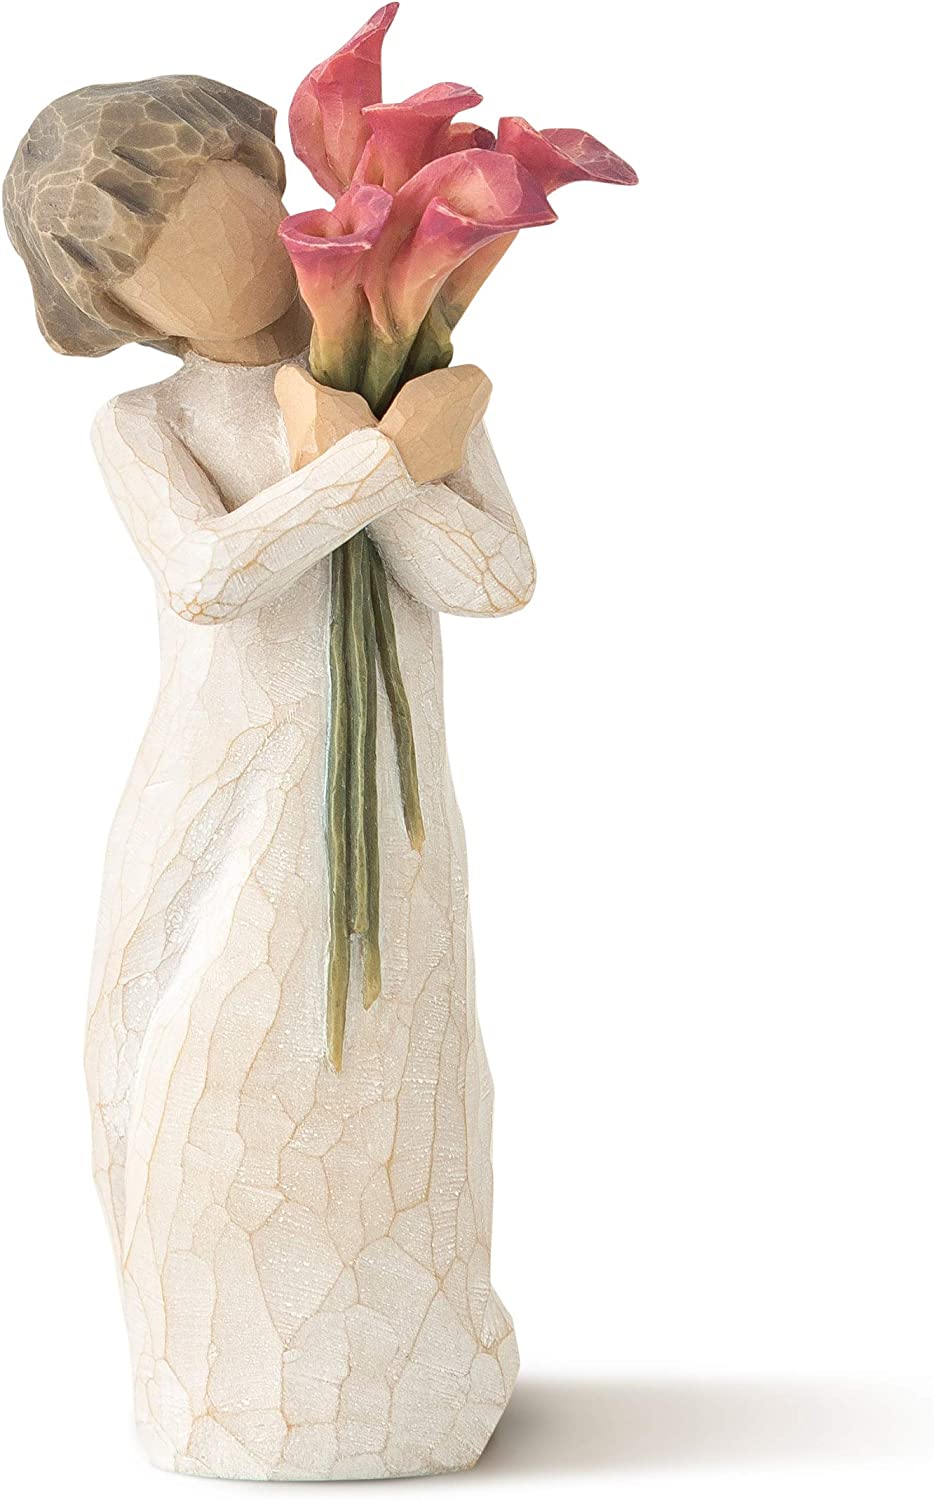 Willow Tree Bloom, Sculpted Hand-Painted Figure